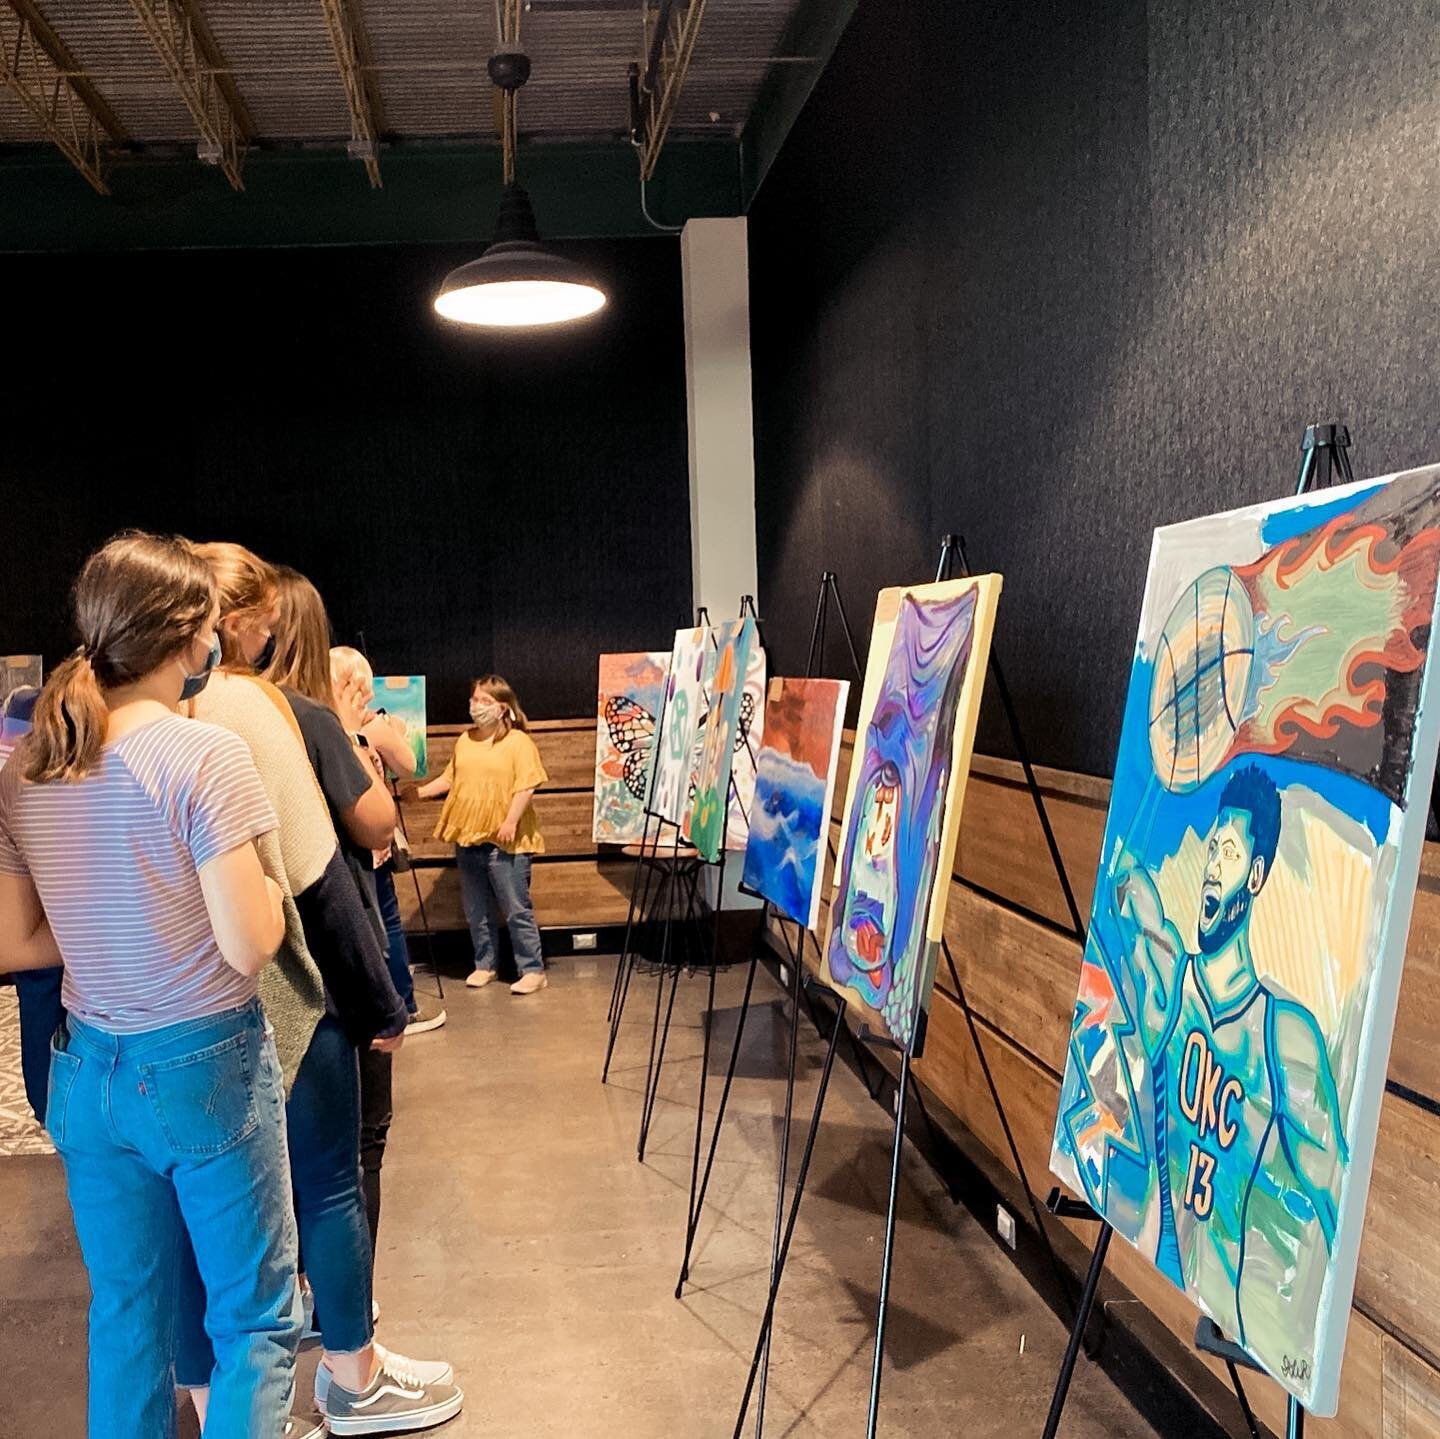 Huge thank you to all of those who came to support our campaign&rsquo;s art show this past Saturday! The collaboration between artists from DSACO, NYAJ and the local area was beautiful and inspiring.